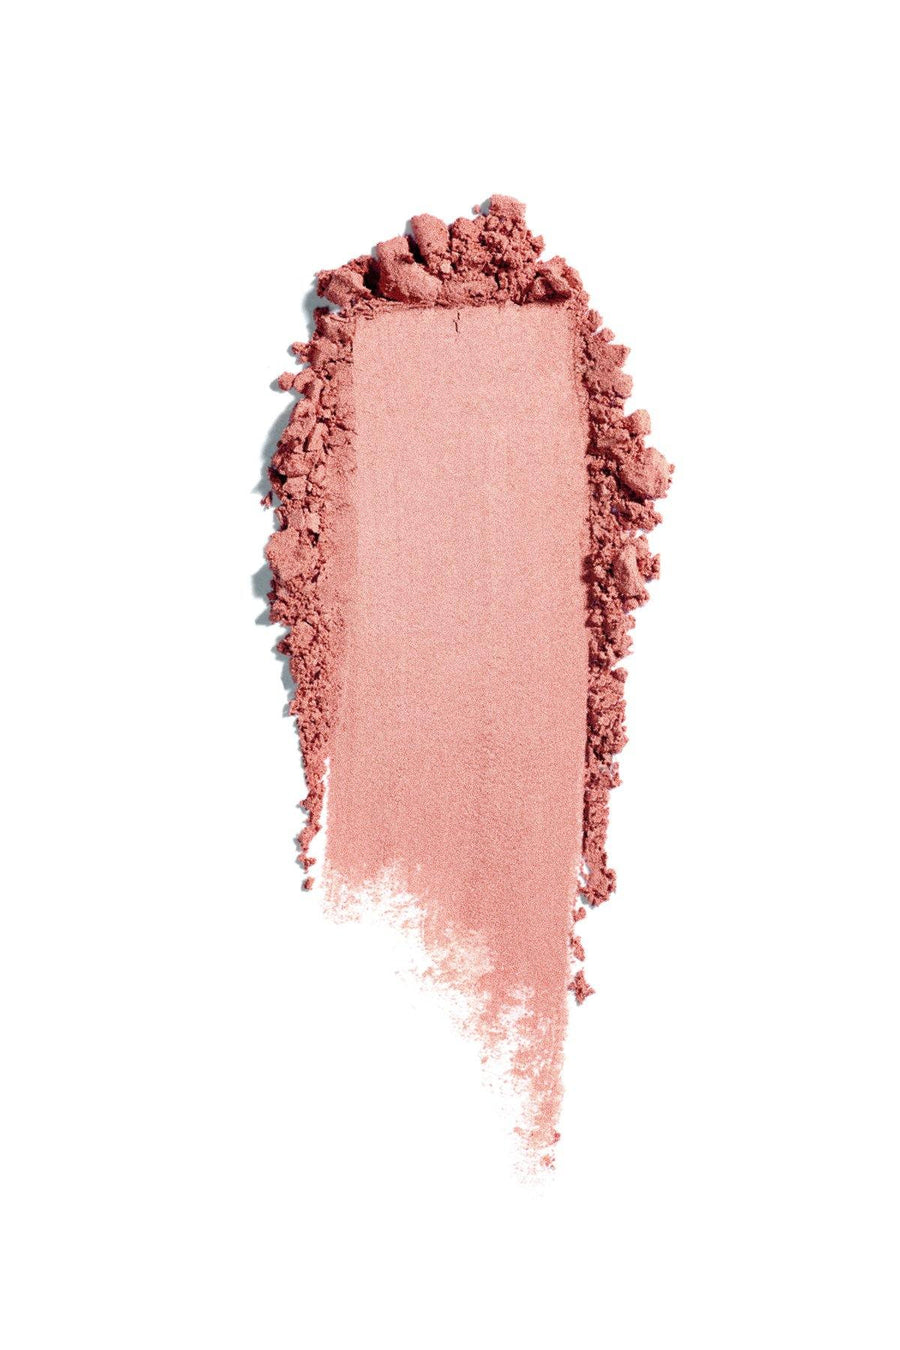 Mineral Blush #11 - Frosted Tulip - Blend Mineral Cosmetics